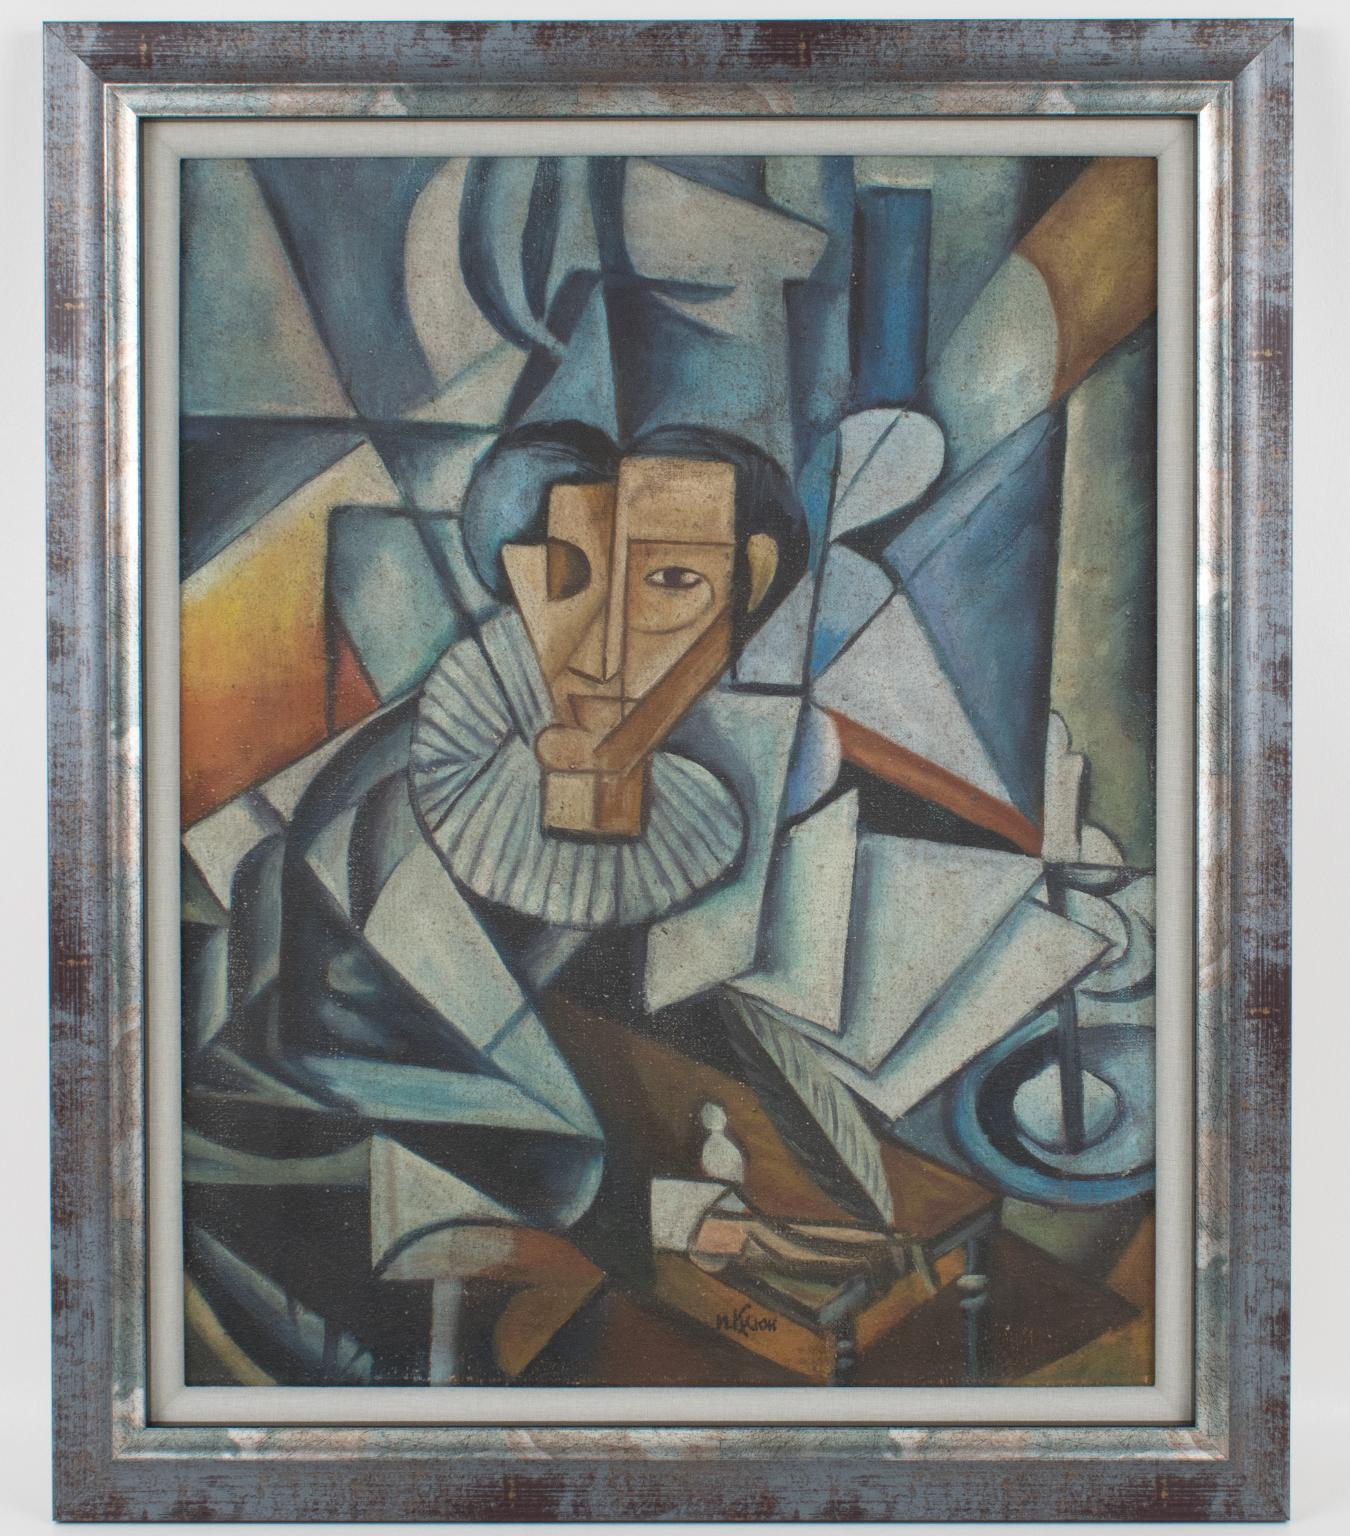 The Lawyer Cubist Oil on Canvas Painting by Ivan Kliun 8